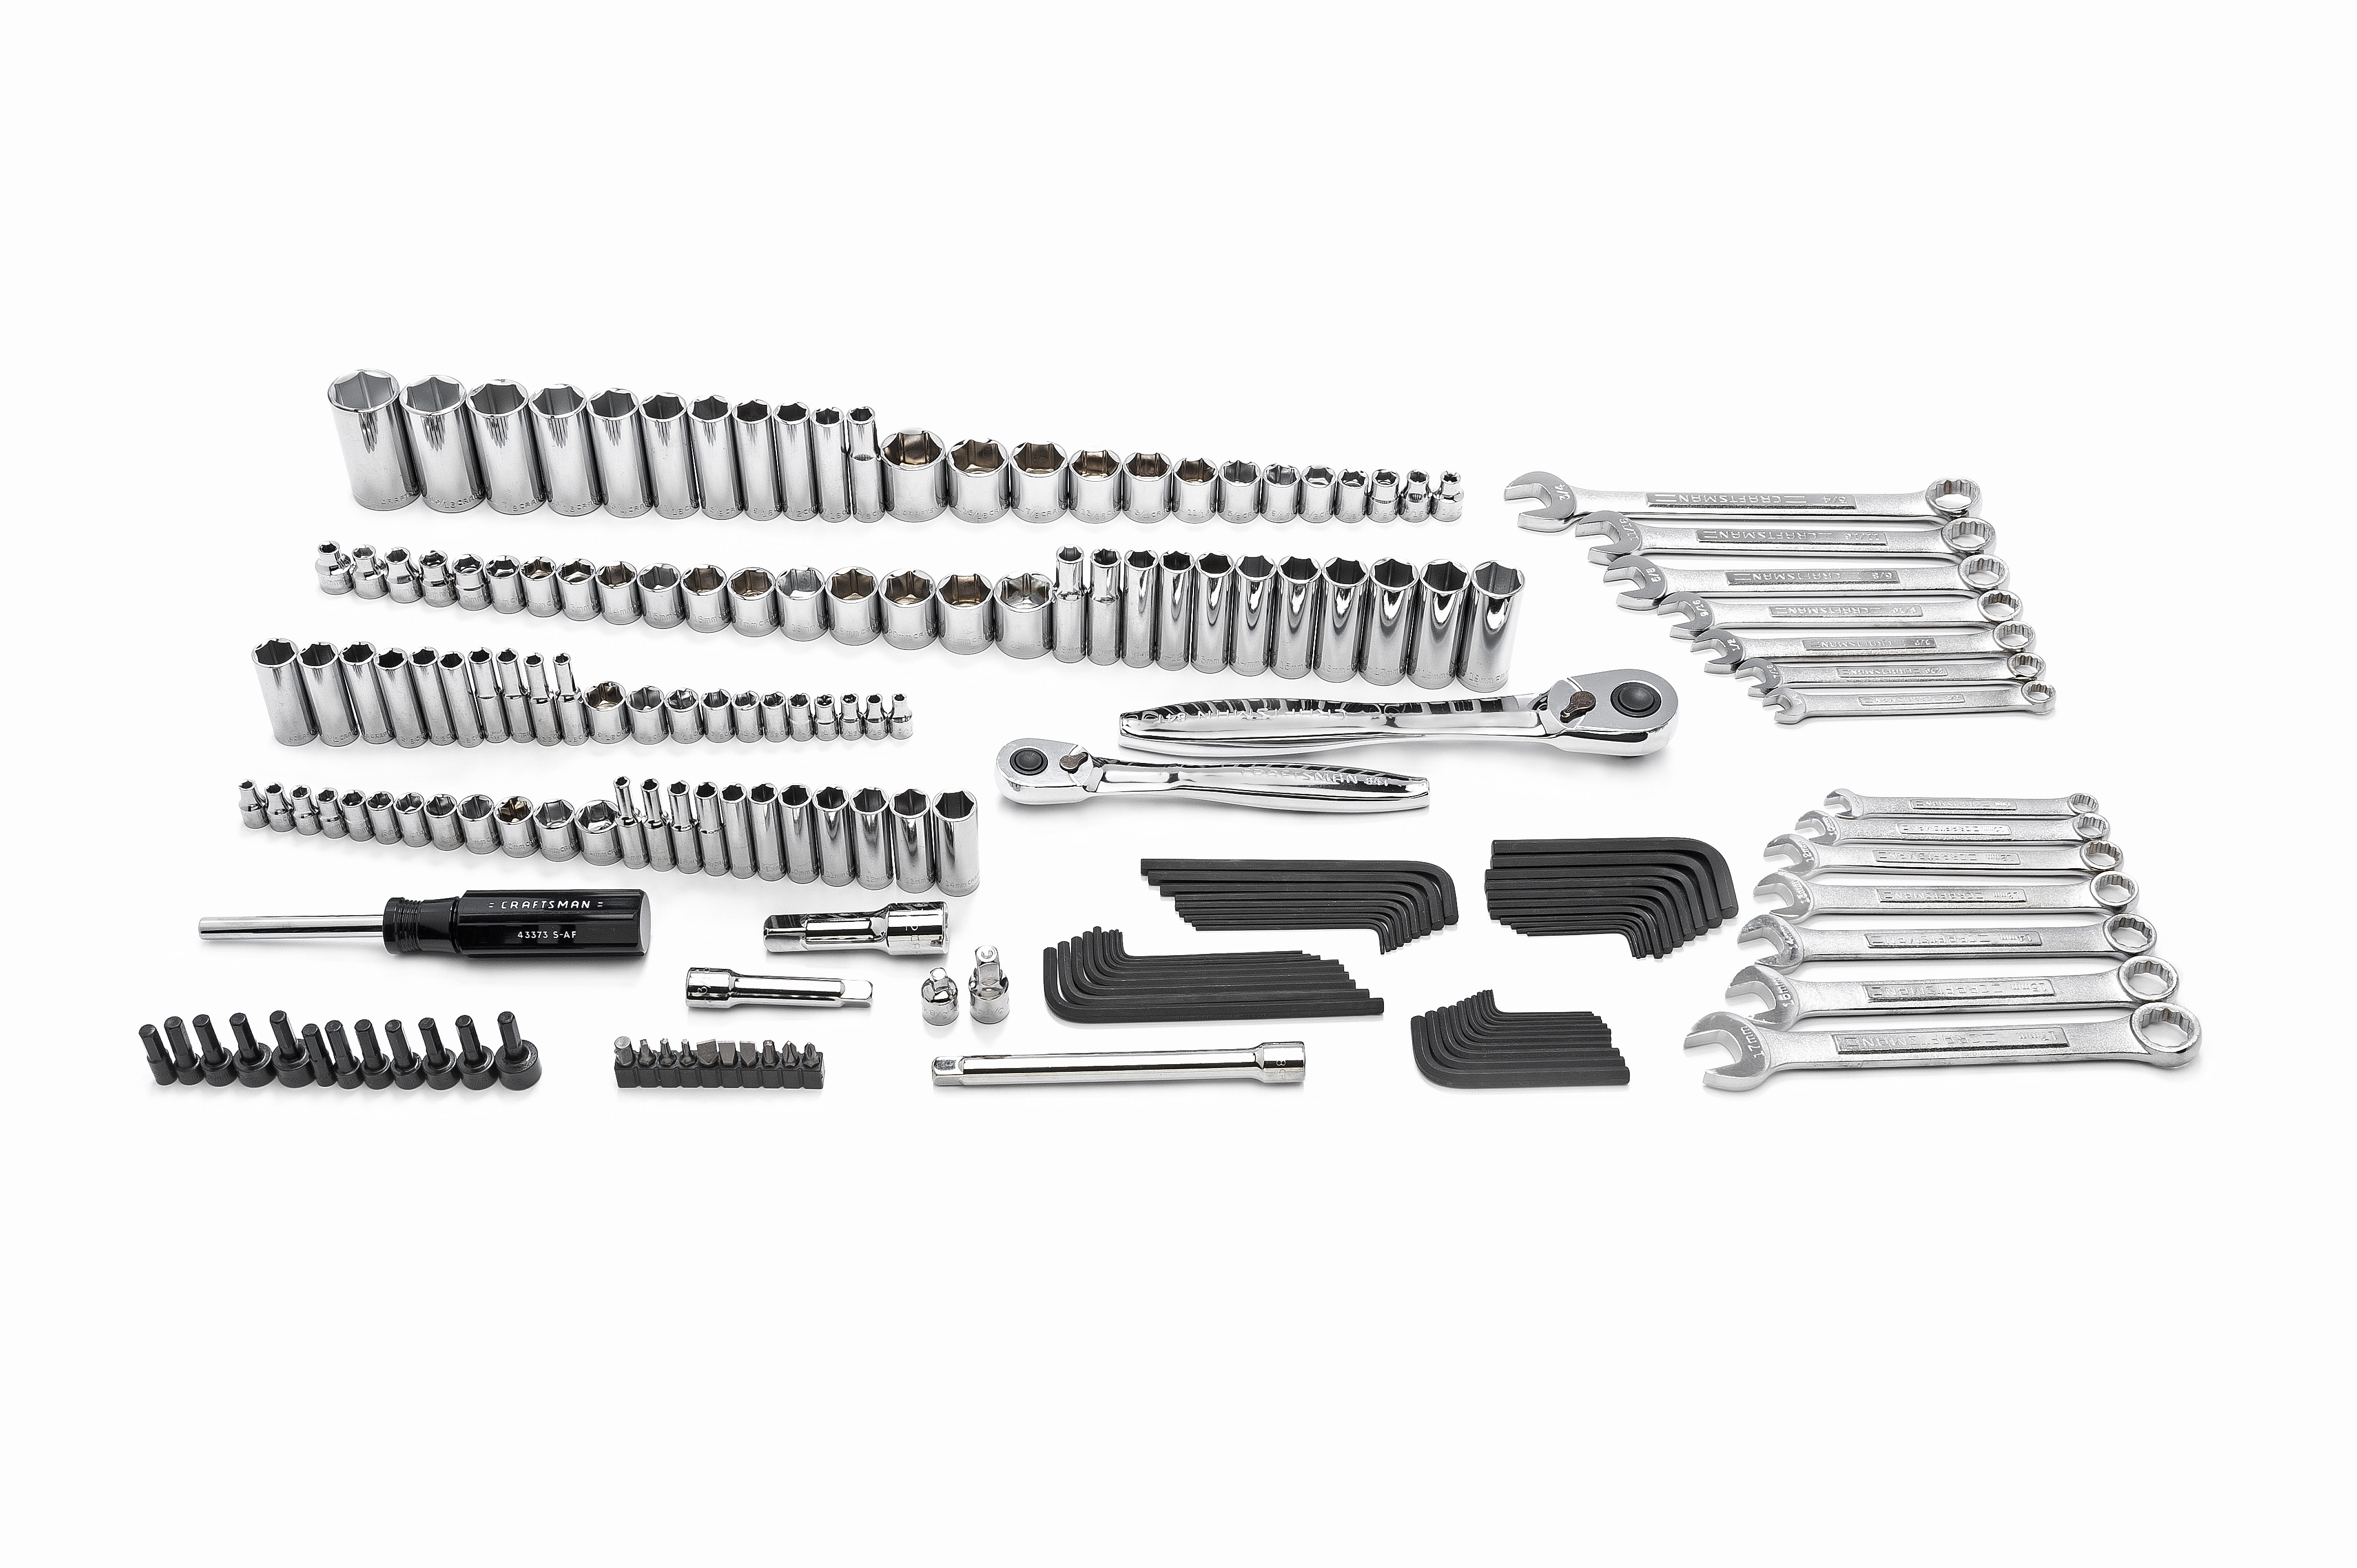 Craftsman 202 pc. Mechanic's Tool Set with 84T Ratchets